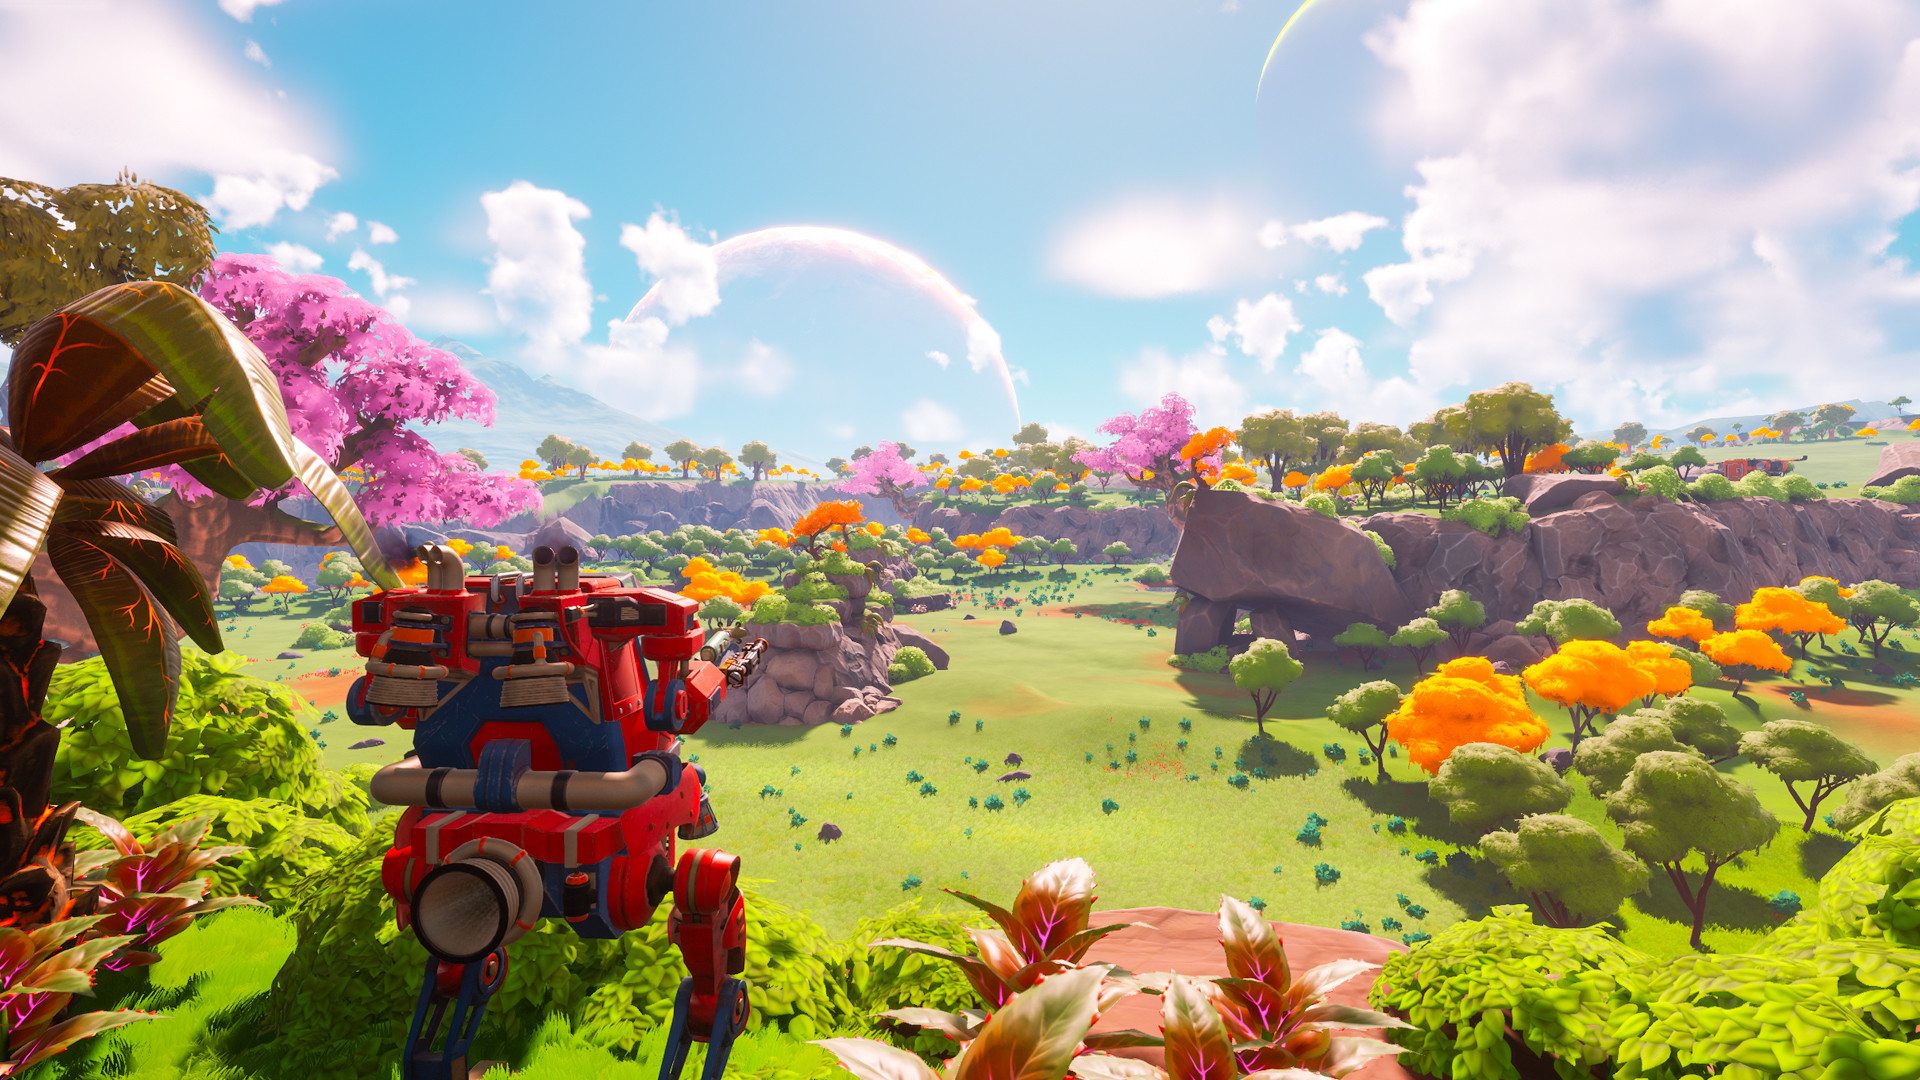 Lightyear Frontier looks like Stardew Valley with a dash of No Man’s Sky